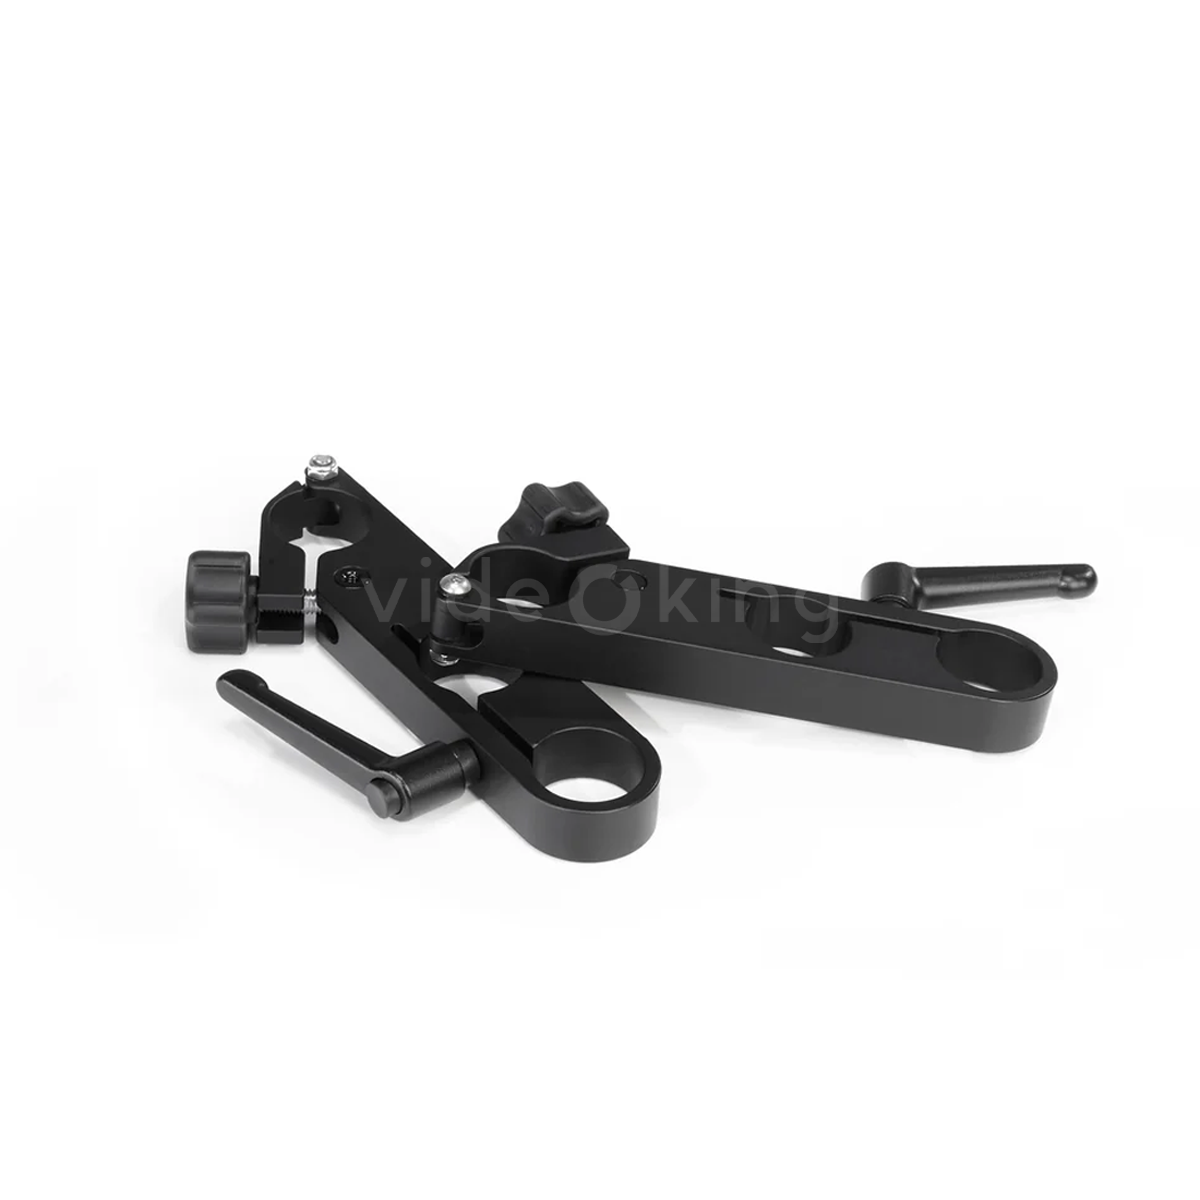 Inovativ Monitor Arm Clamps for Monitors in Motion (Set of 2)